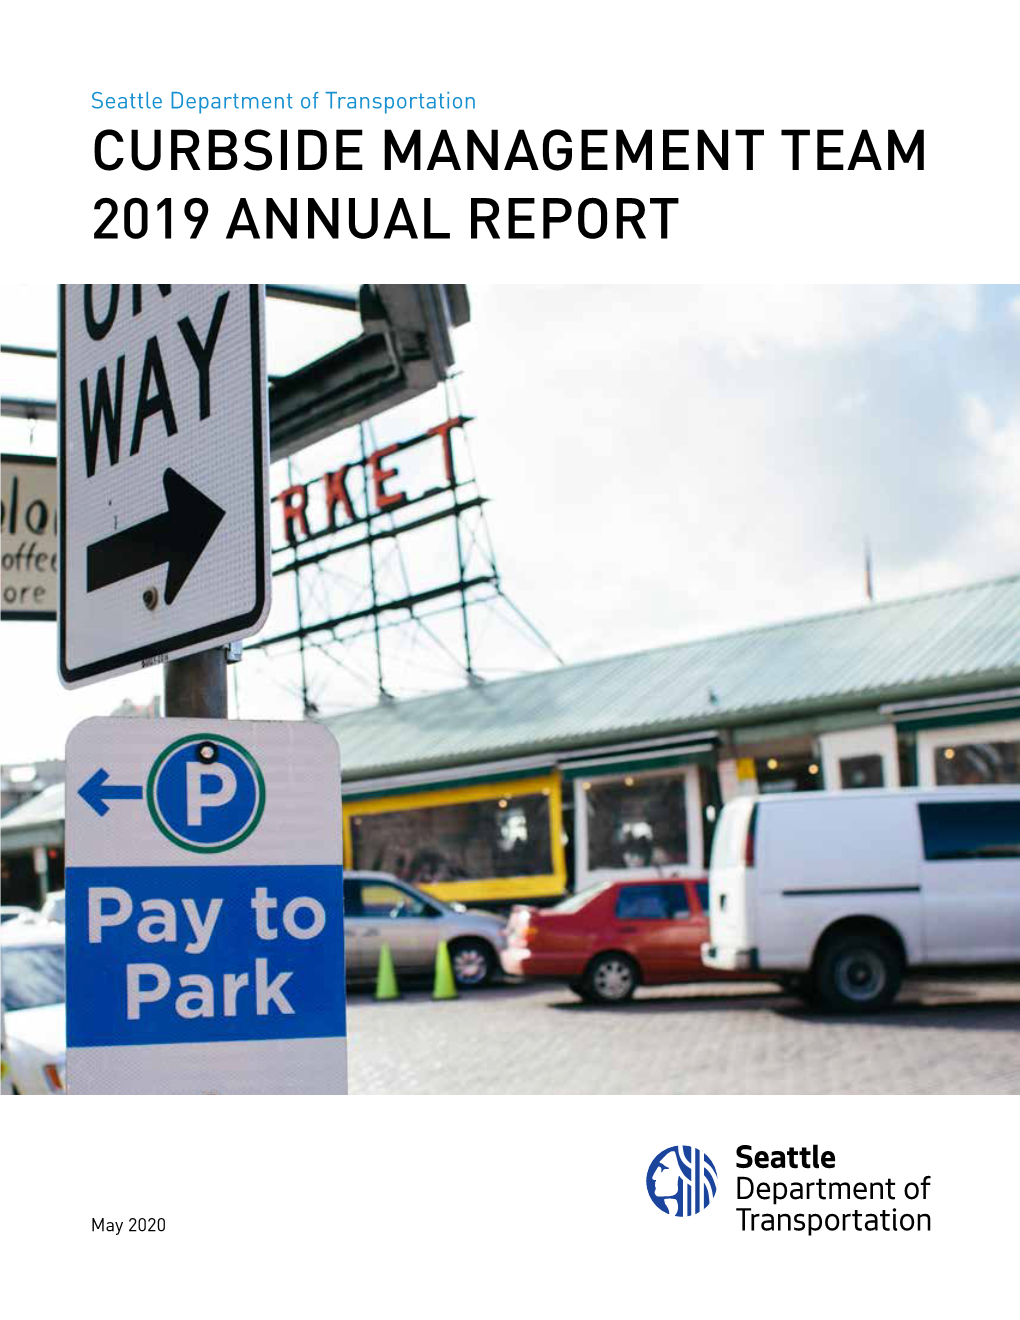 Curbside Management Team 2019 Annual Report